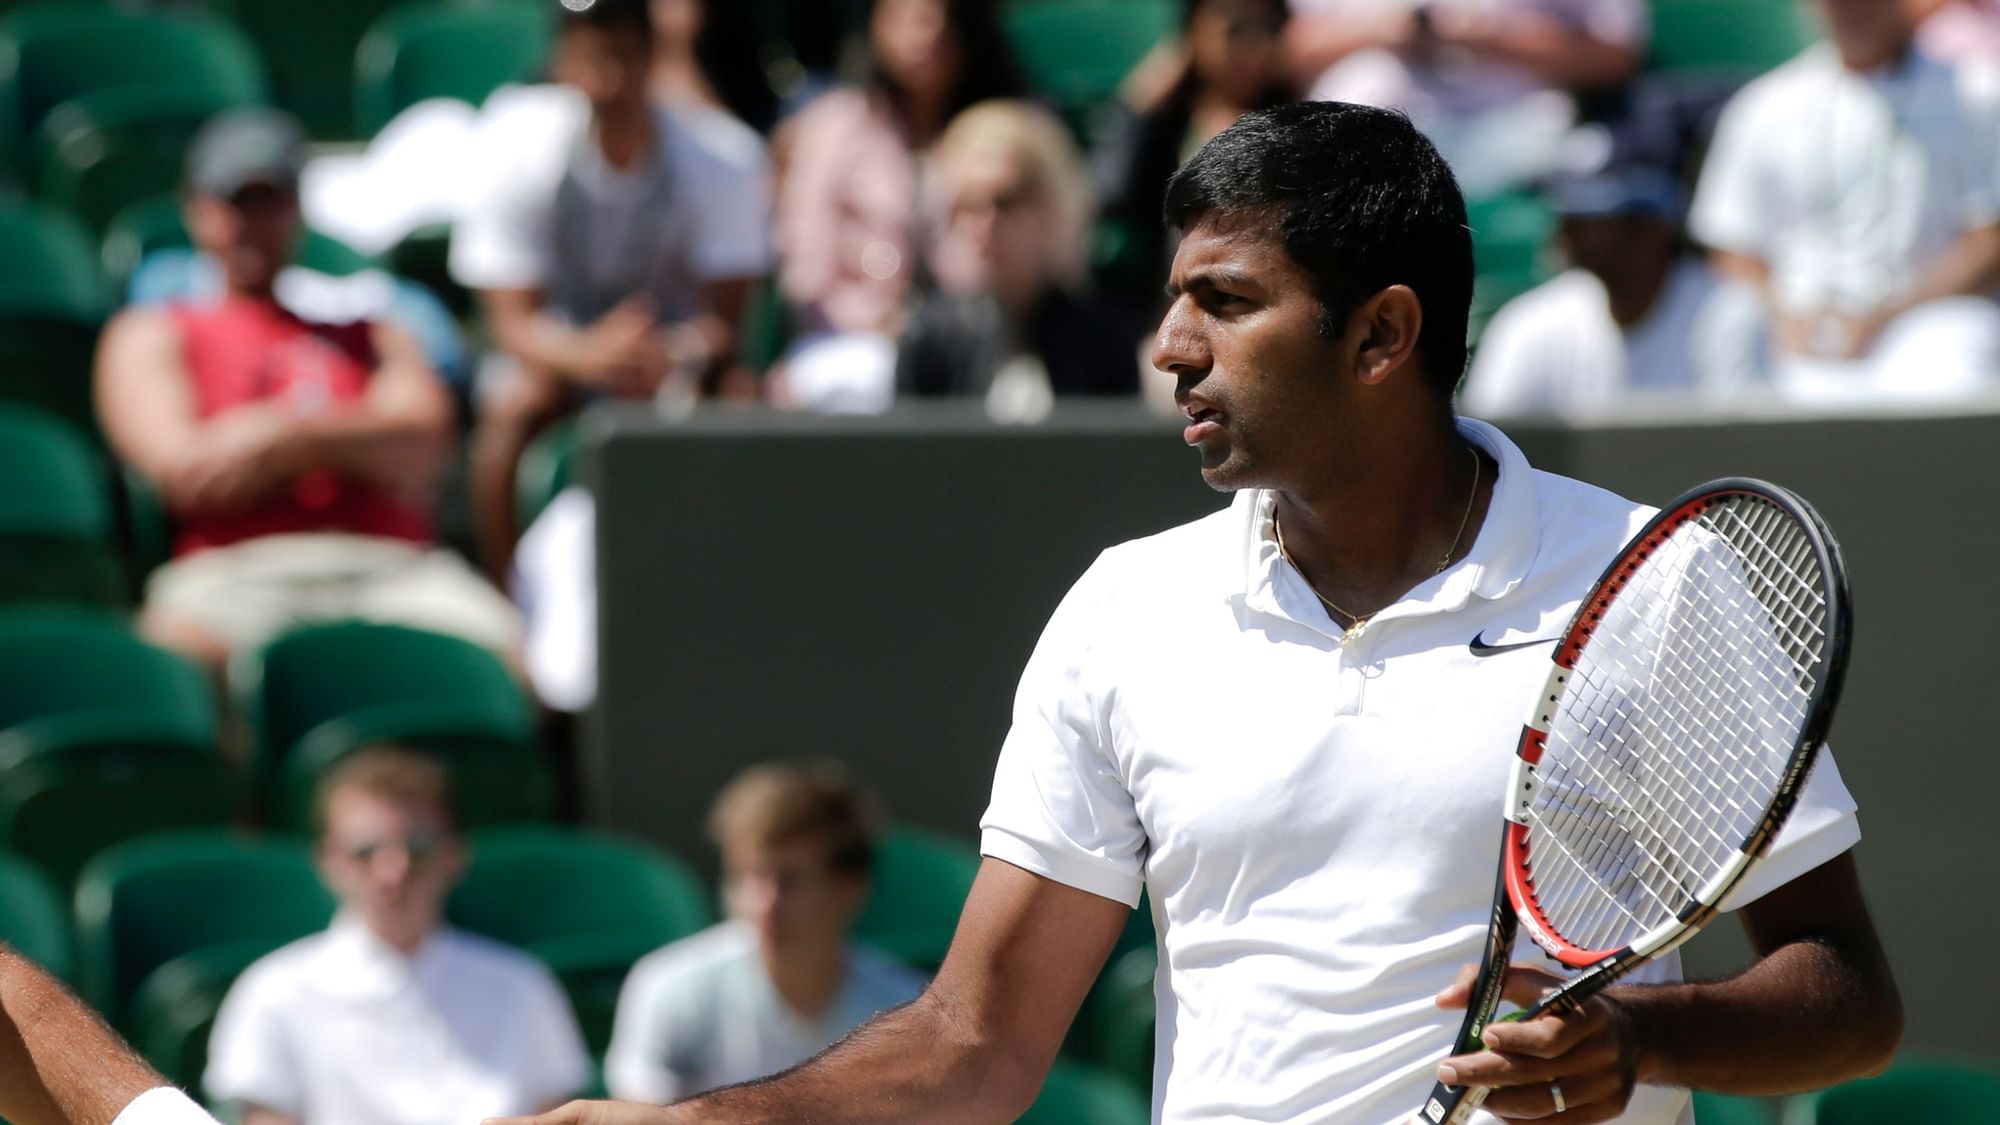 Rohan Bopanna on Monday pulled out of India’s Davis Cup tie against Pakistan due to a shoulder injury.